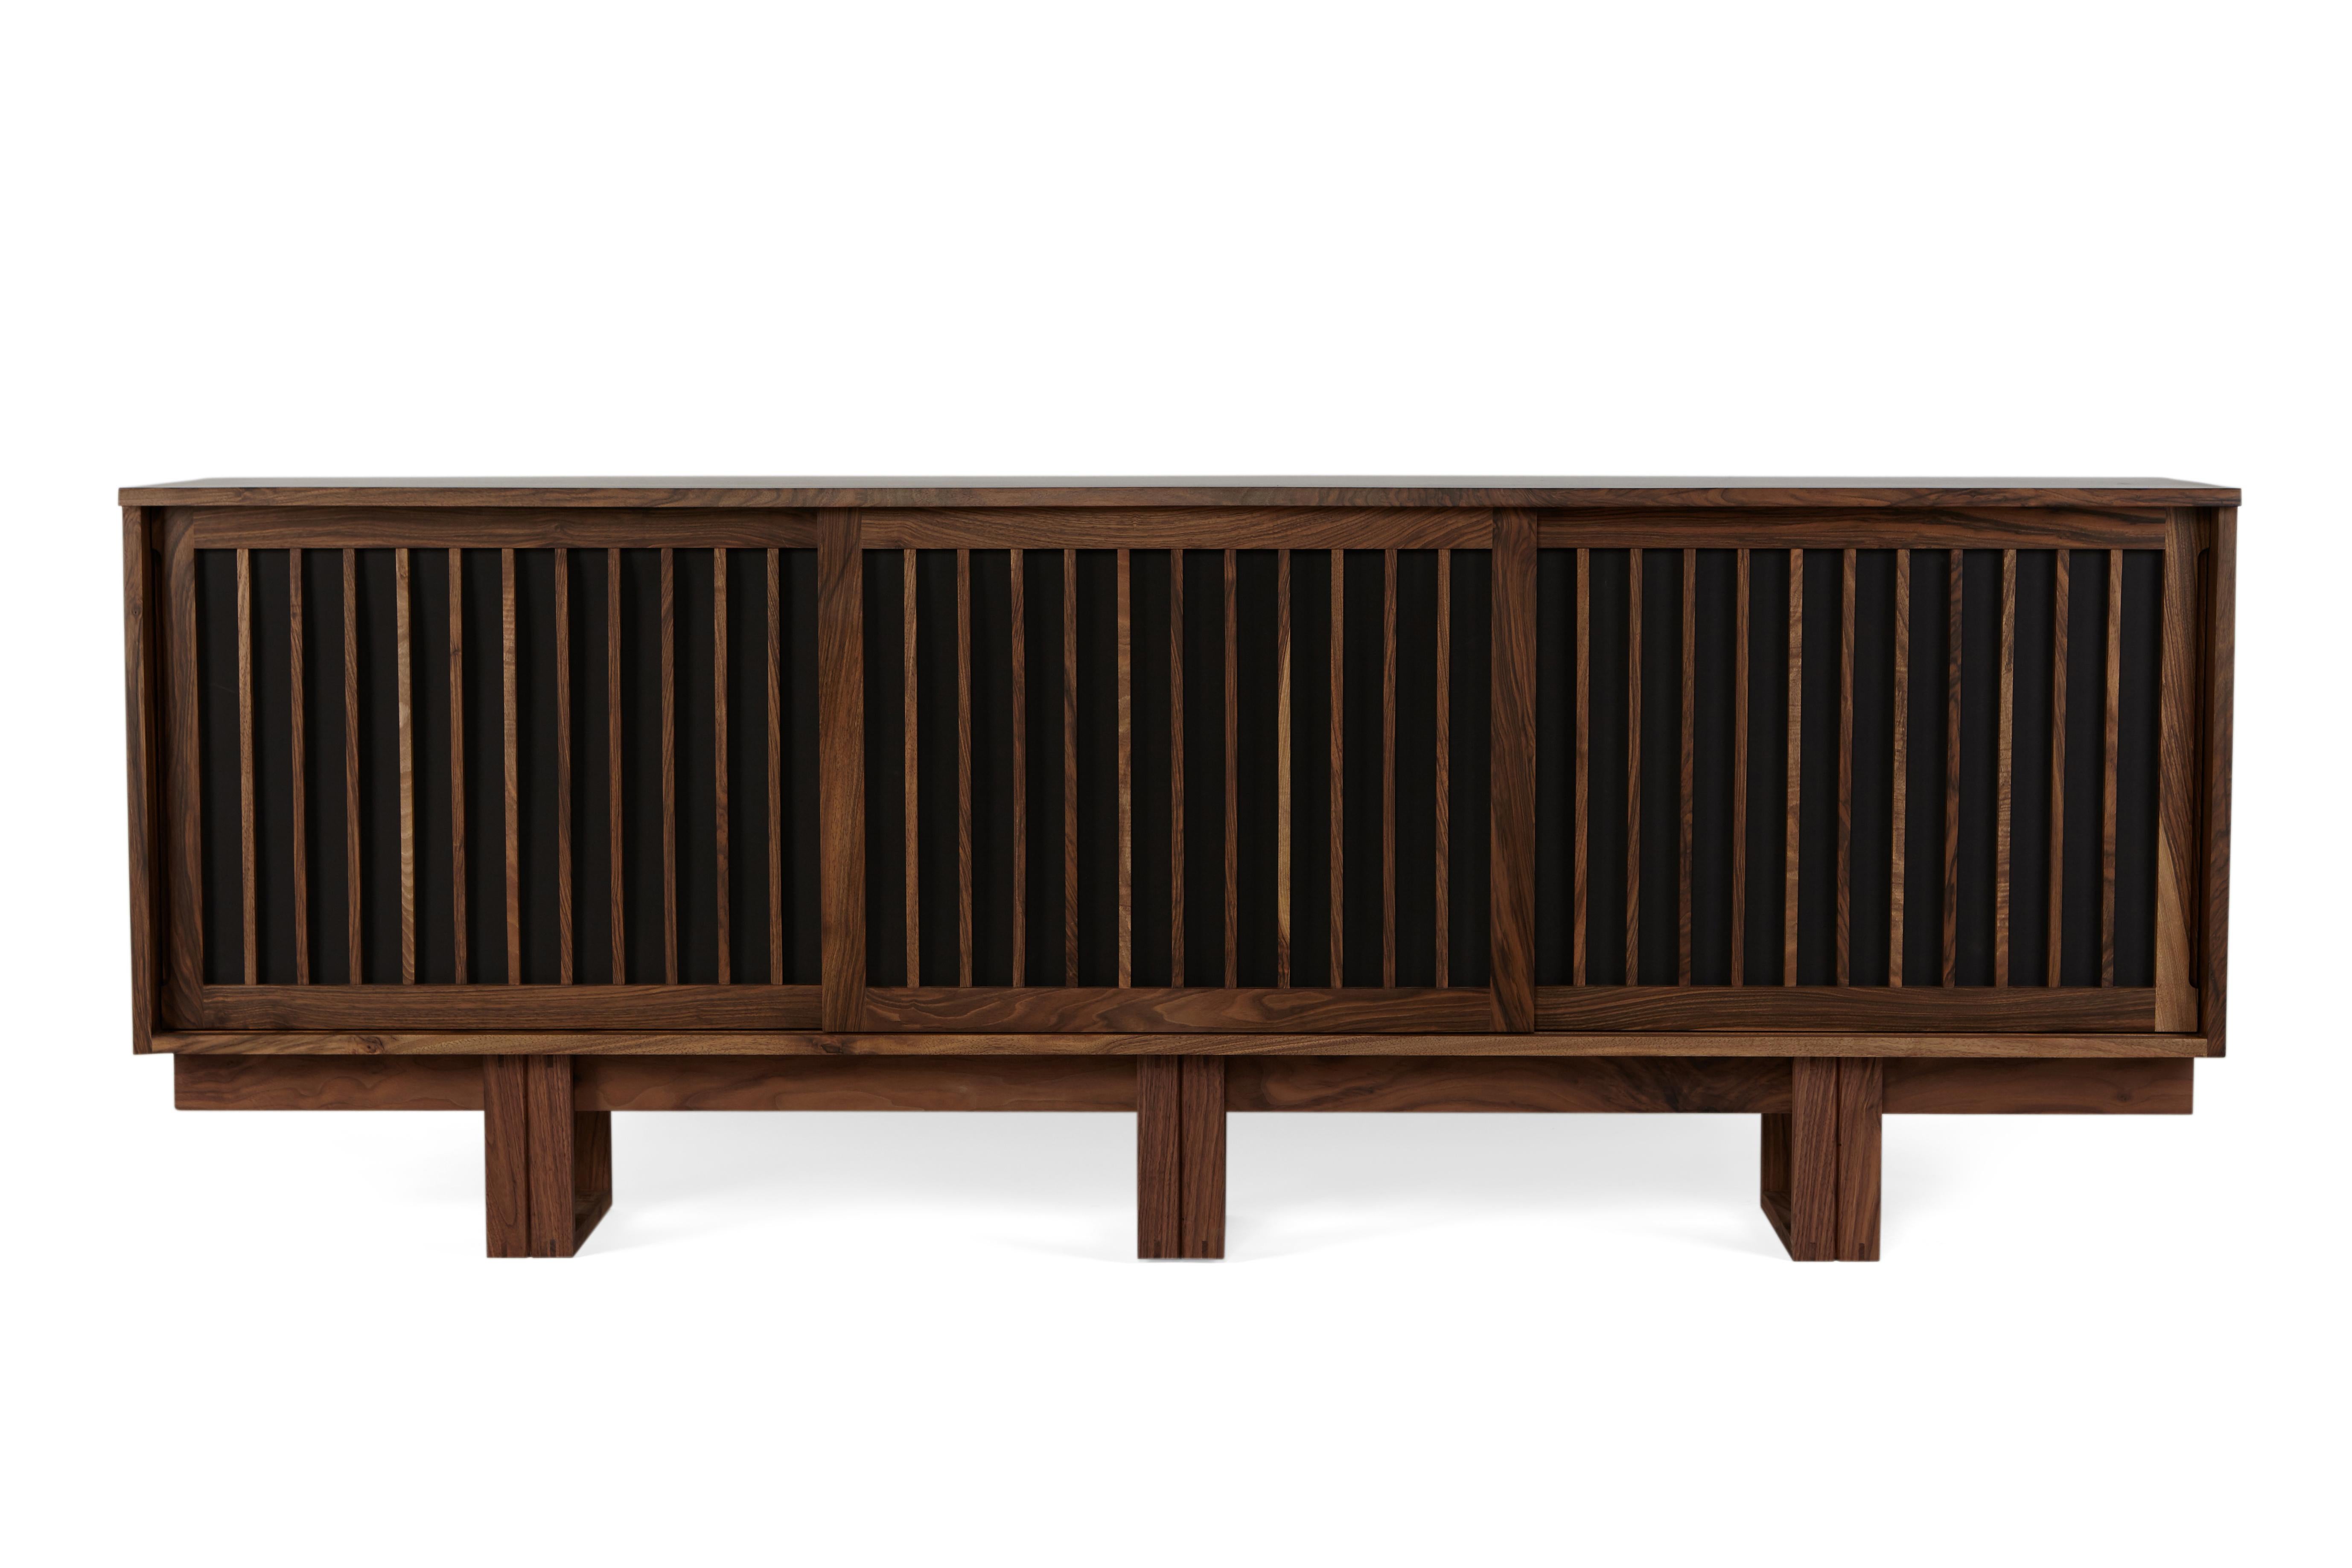 The design for this cabinet in solid walnut takes its inspiration from midcentury designer-makers such as George Nakashima.
It has three slatted sliding doors, which can either have paper or fabric backing panels, and the centre section has three